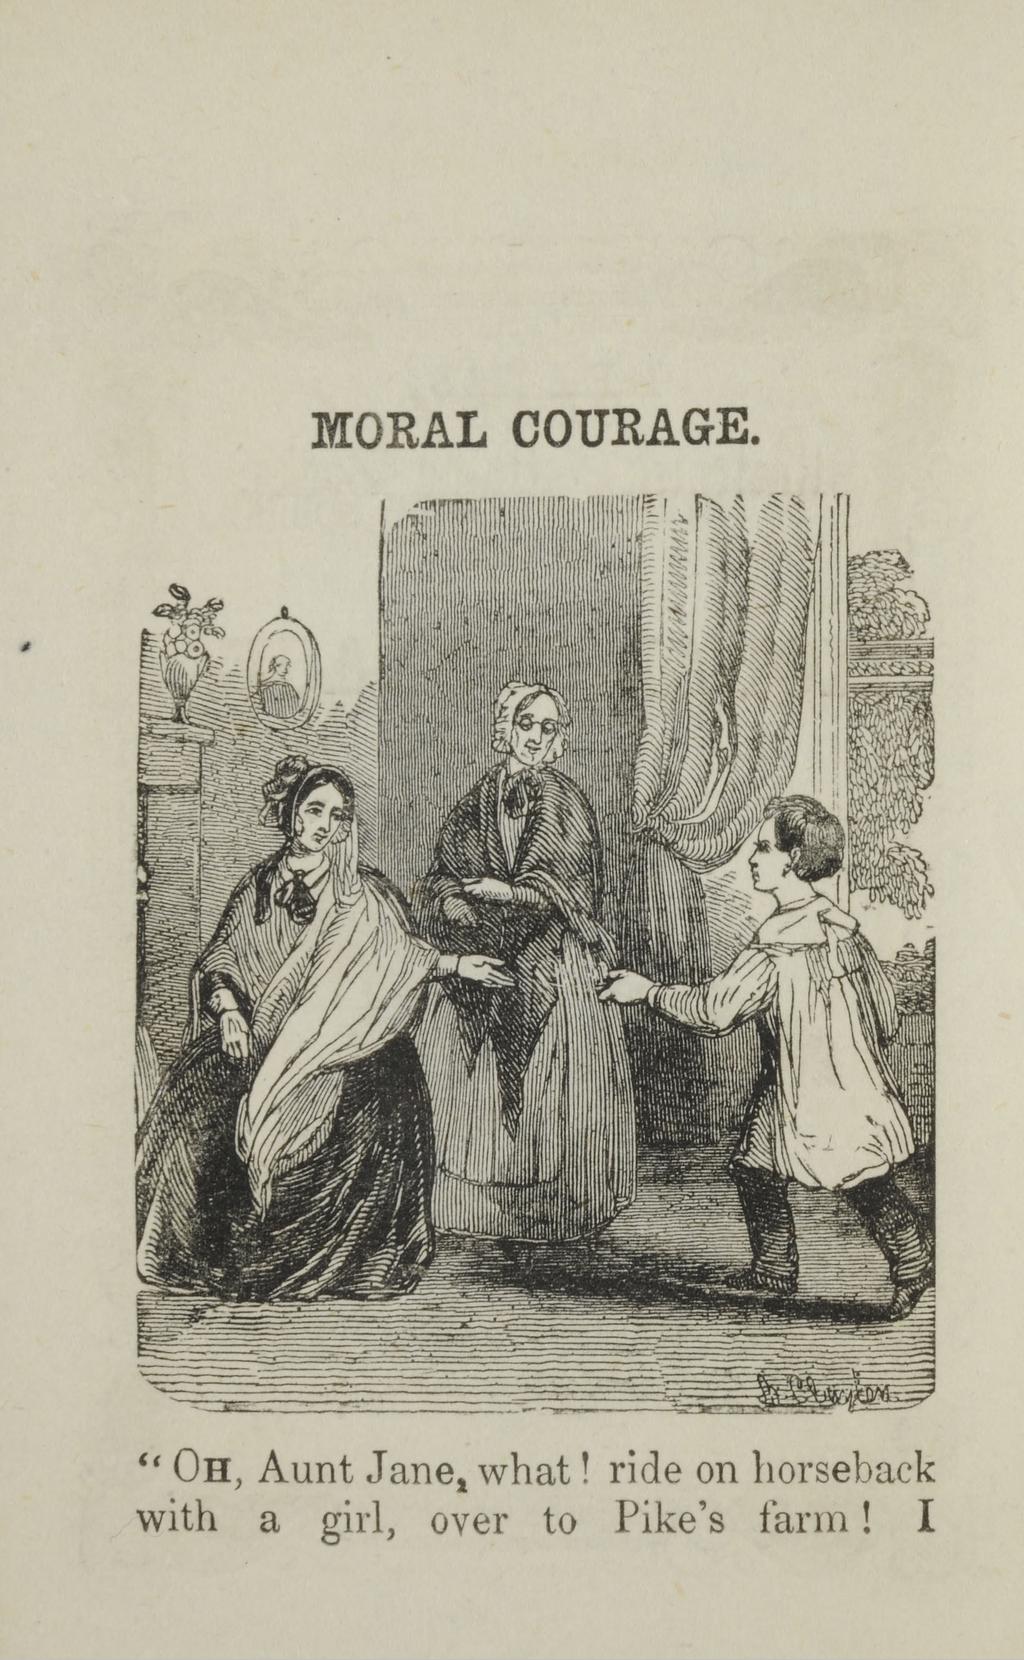 MORAL COURAGE. " OH, Aunt Jane, w hat!